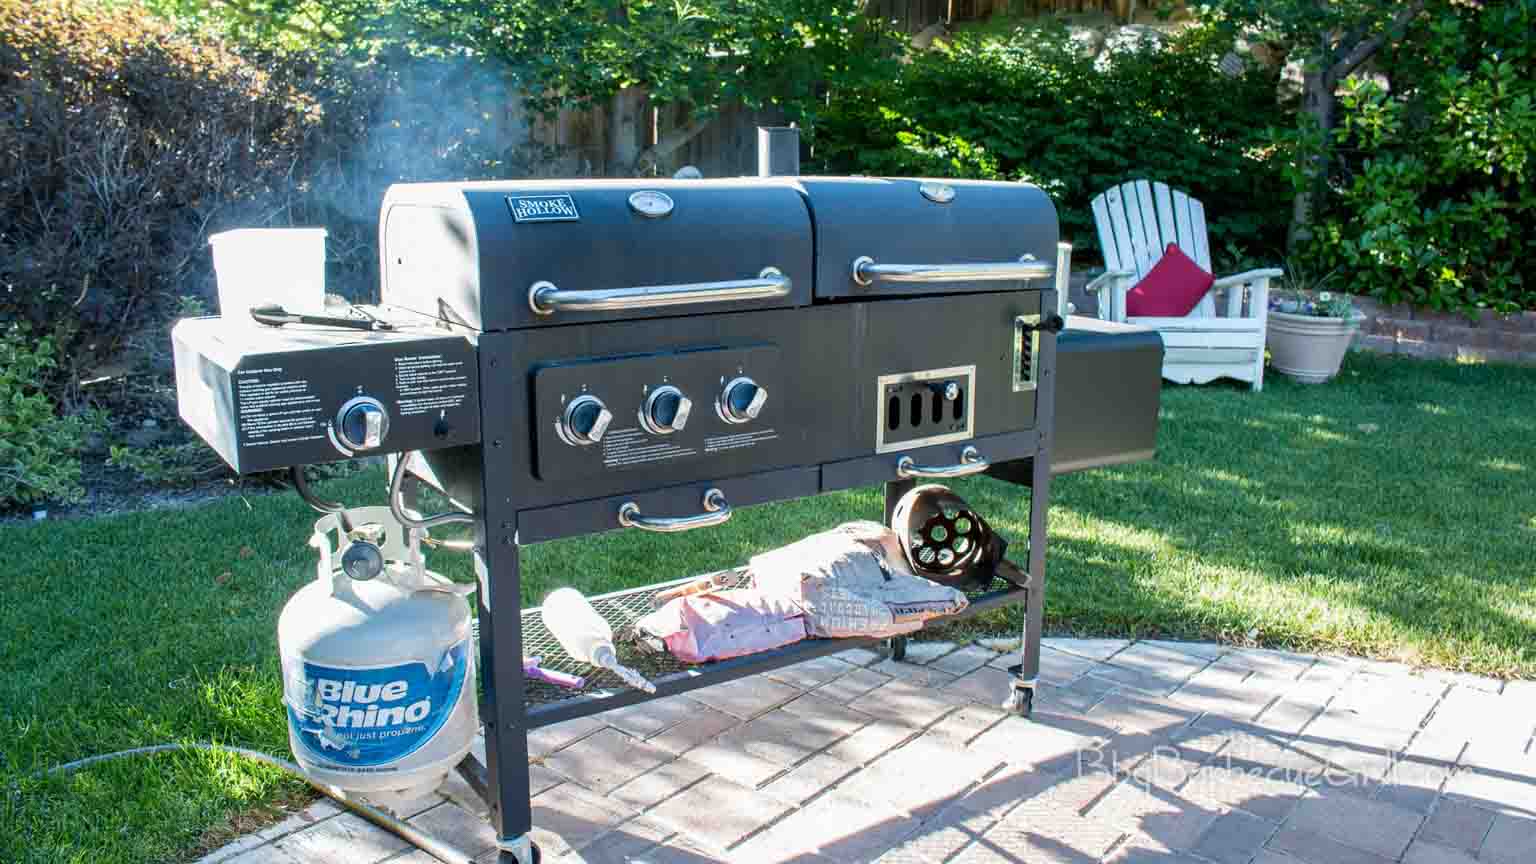 Grilling in the backyard